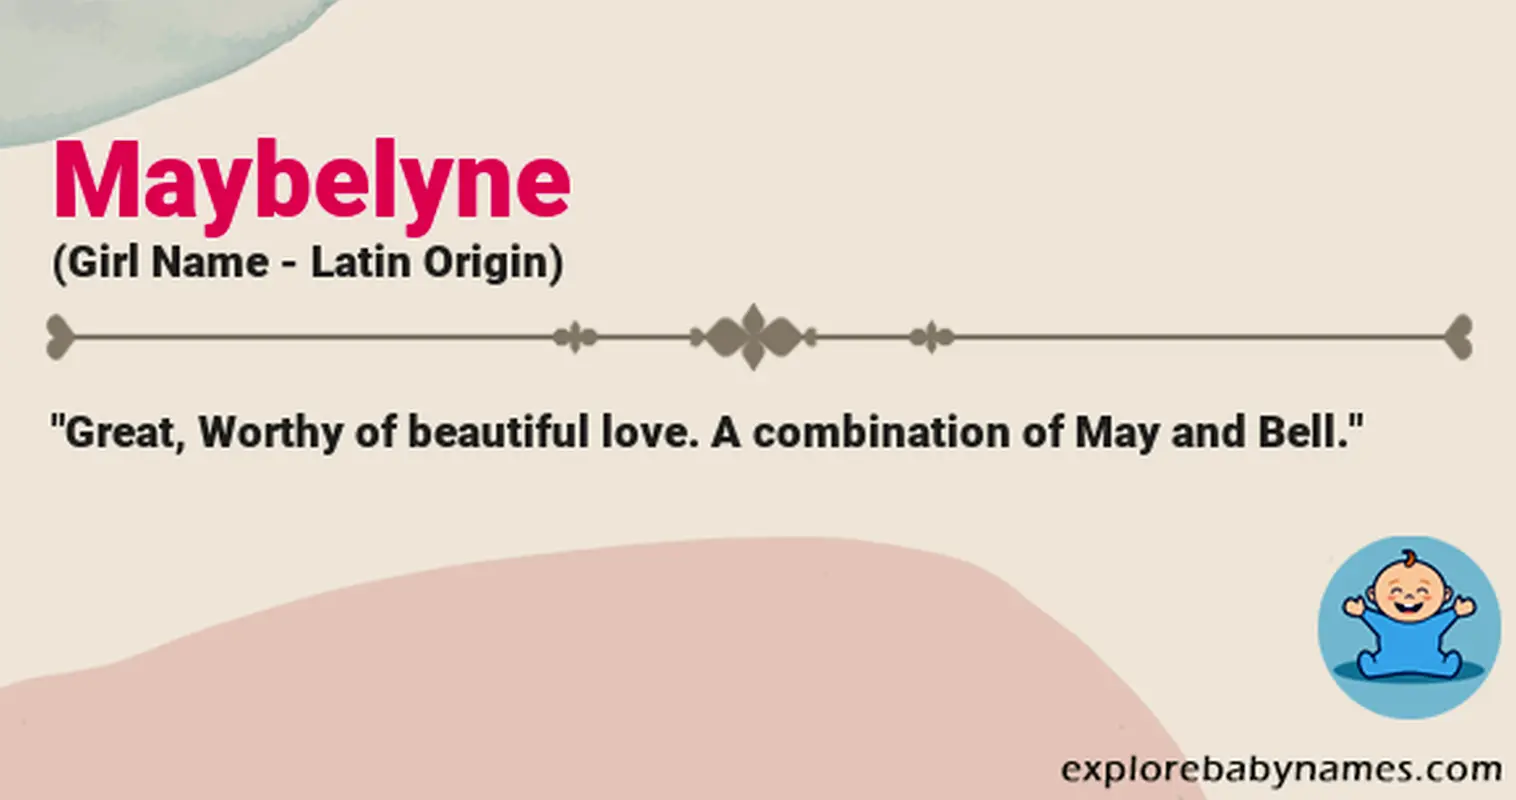 Meaning of Maybelyne